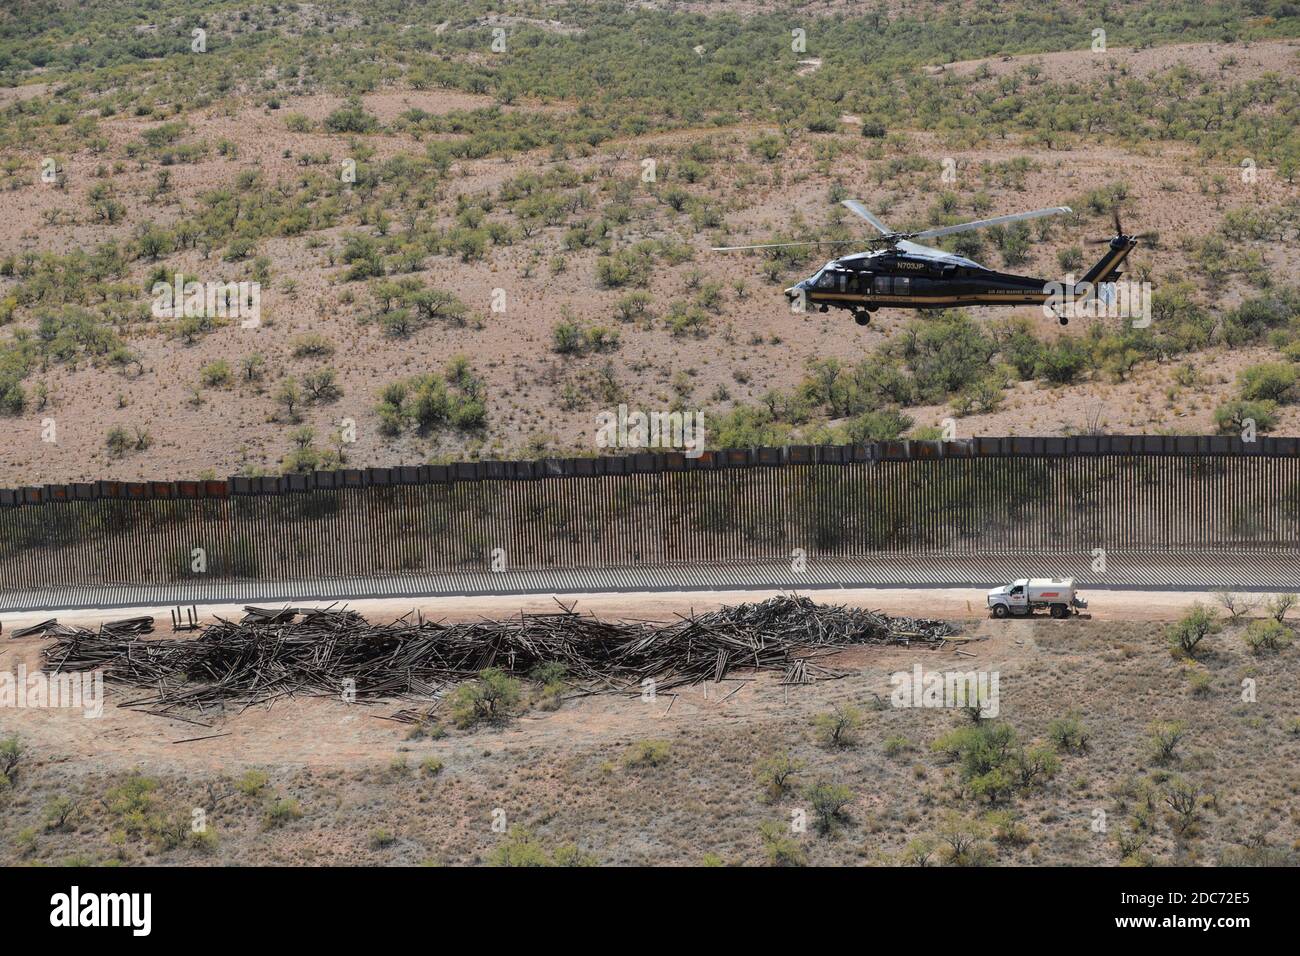 U.S. Department of Homeland Security Acting Deputy Secretary Ken Cuccinelli tours a newly constructed section of the Trump Wall by helicopter in the Tucson Sector November 2, 2020 near Tucson, Arizona. Stock Photo